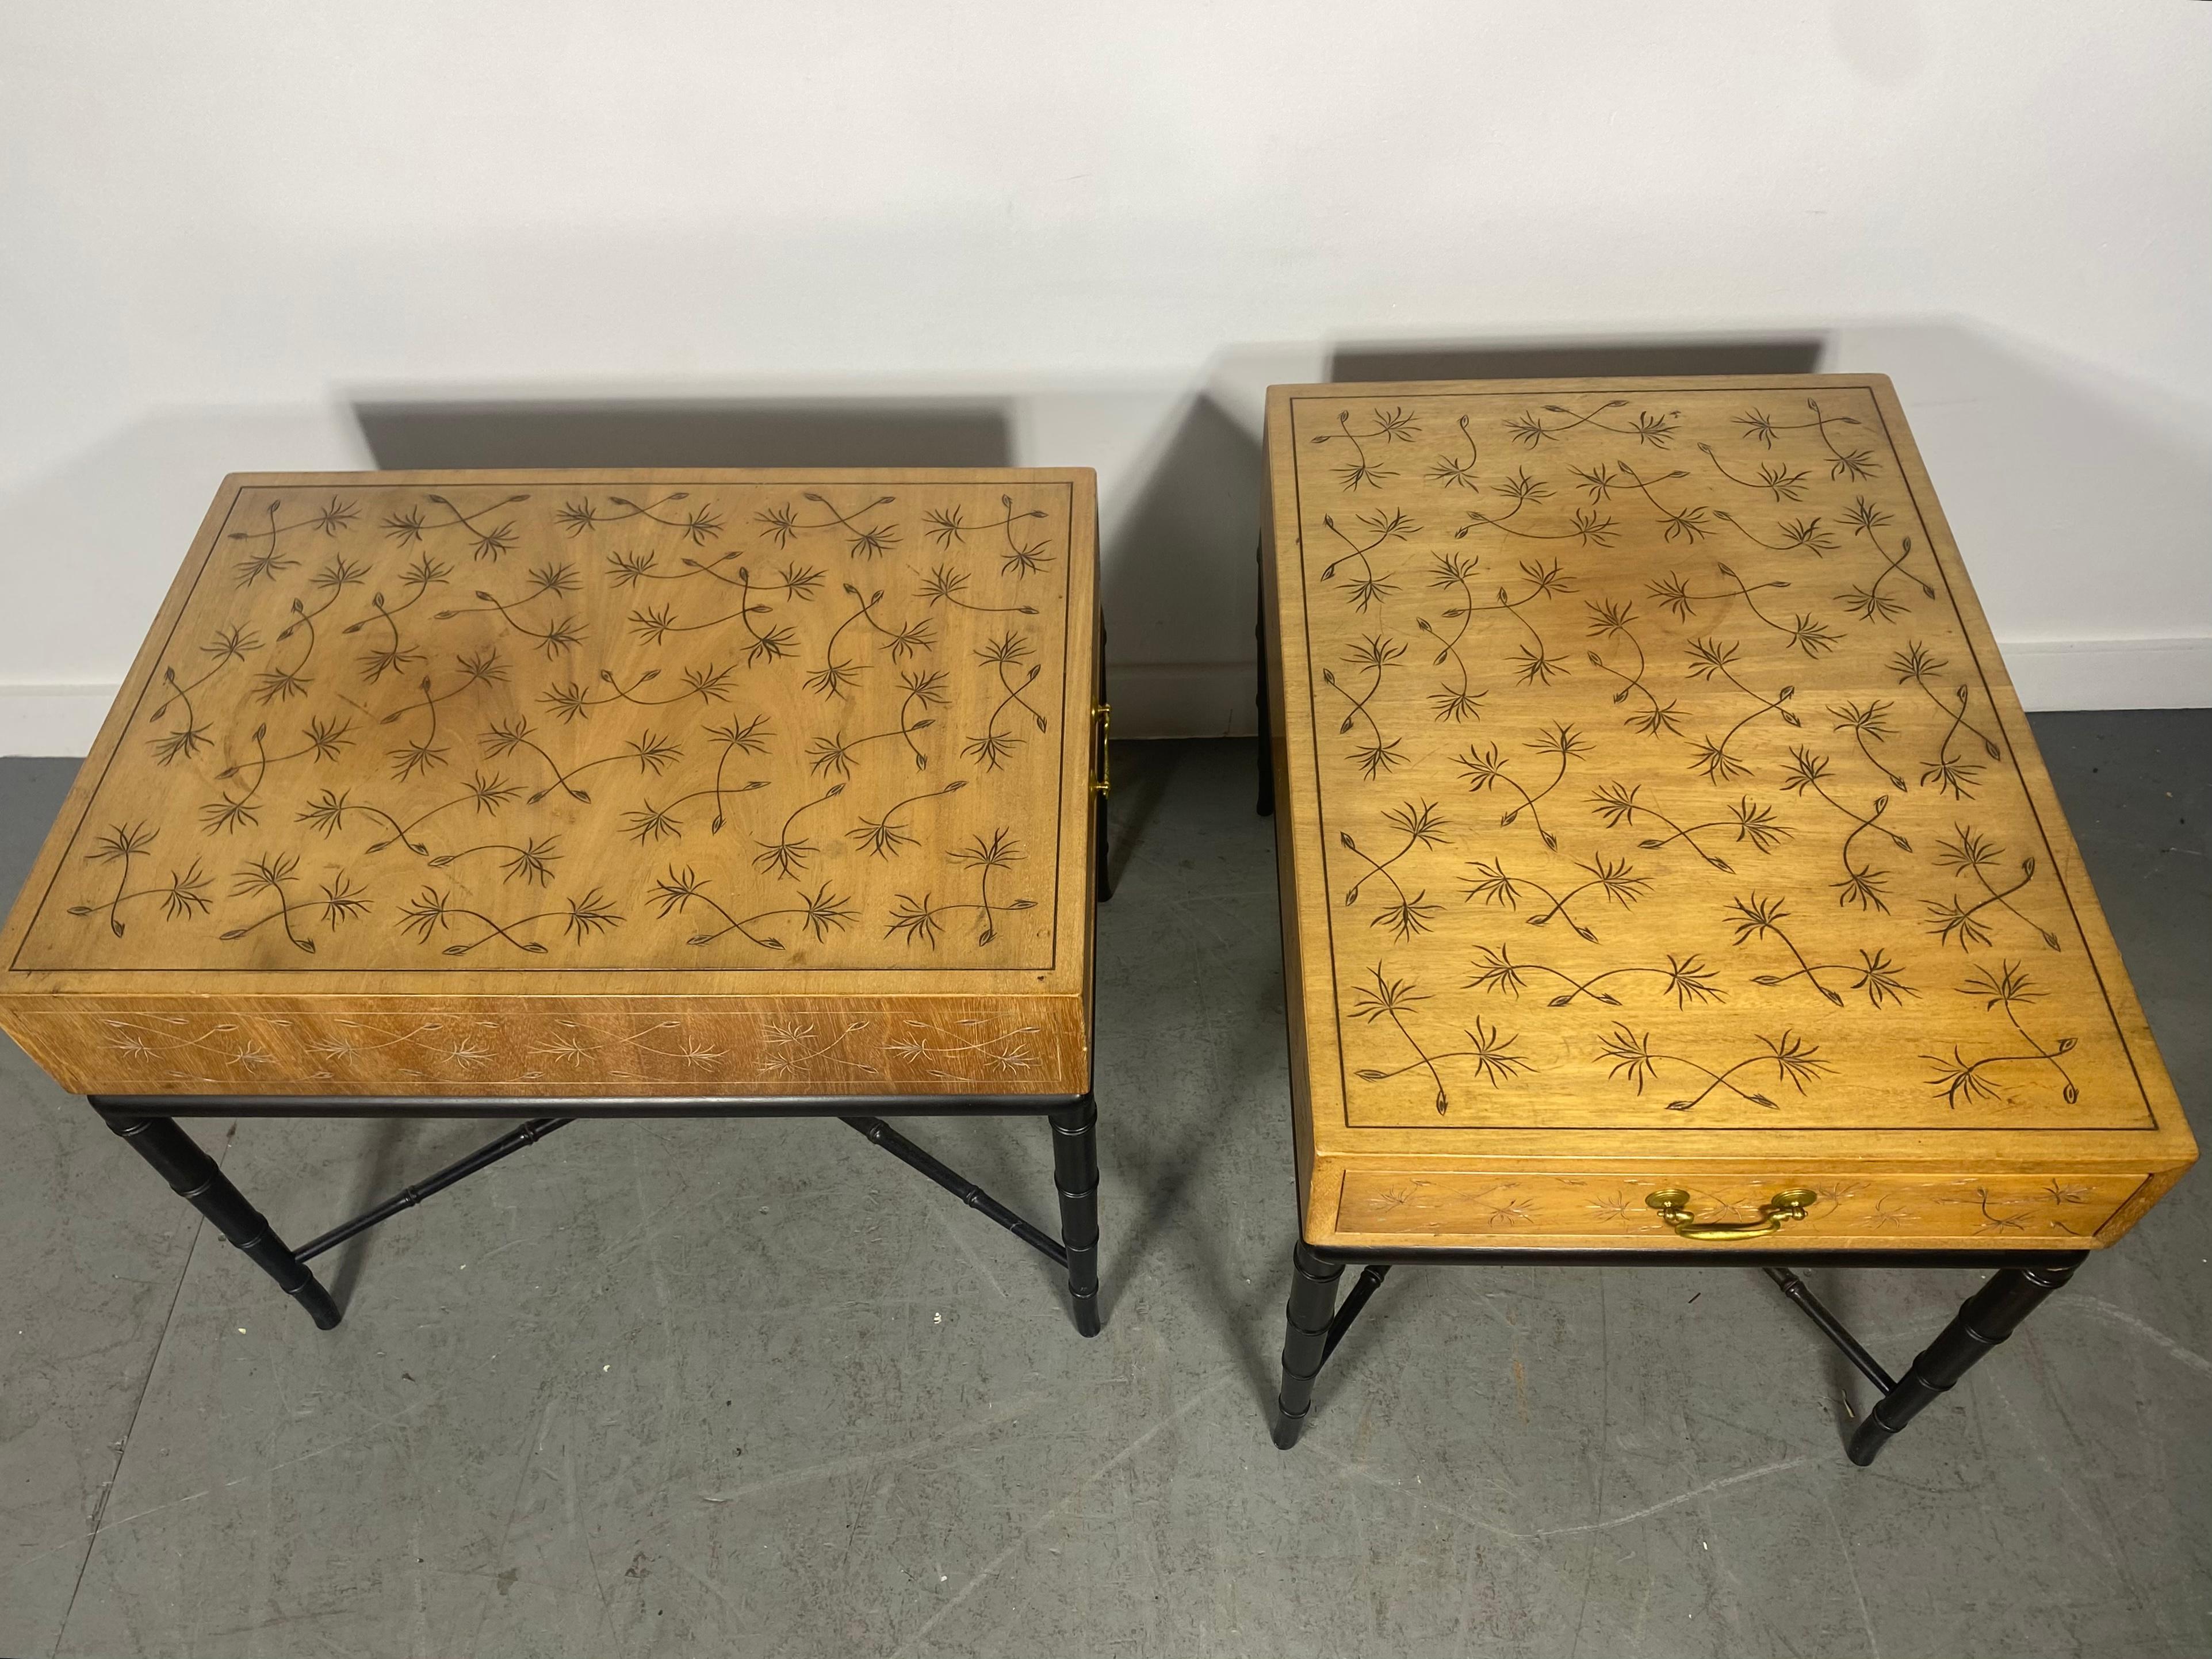 PAIR of Hollywood Regency-style (1950s) end / side tables with a walnut top section with an incised dandelion design and a single drawer with a brass drawer pull, resting on a black lacquered faux bamboo base with four tapered legs and an x-shaped